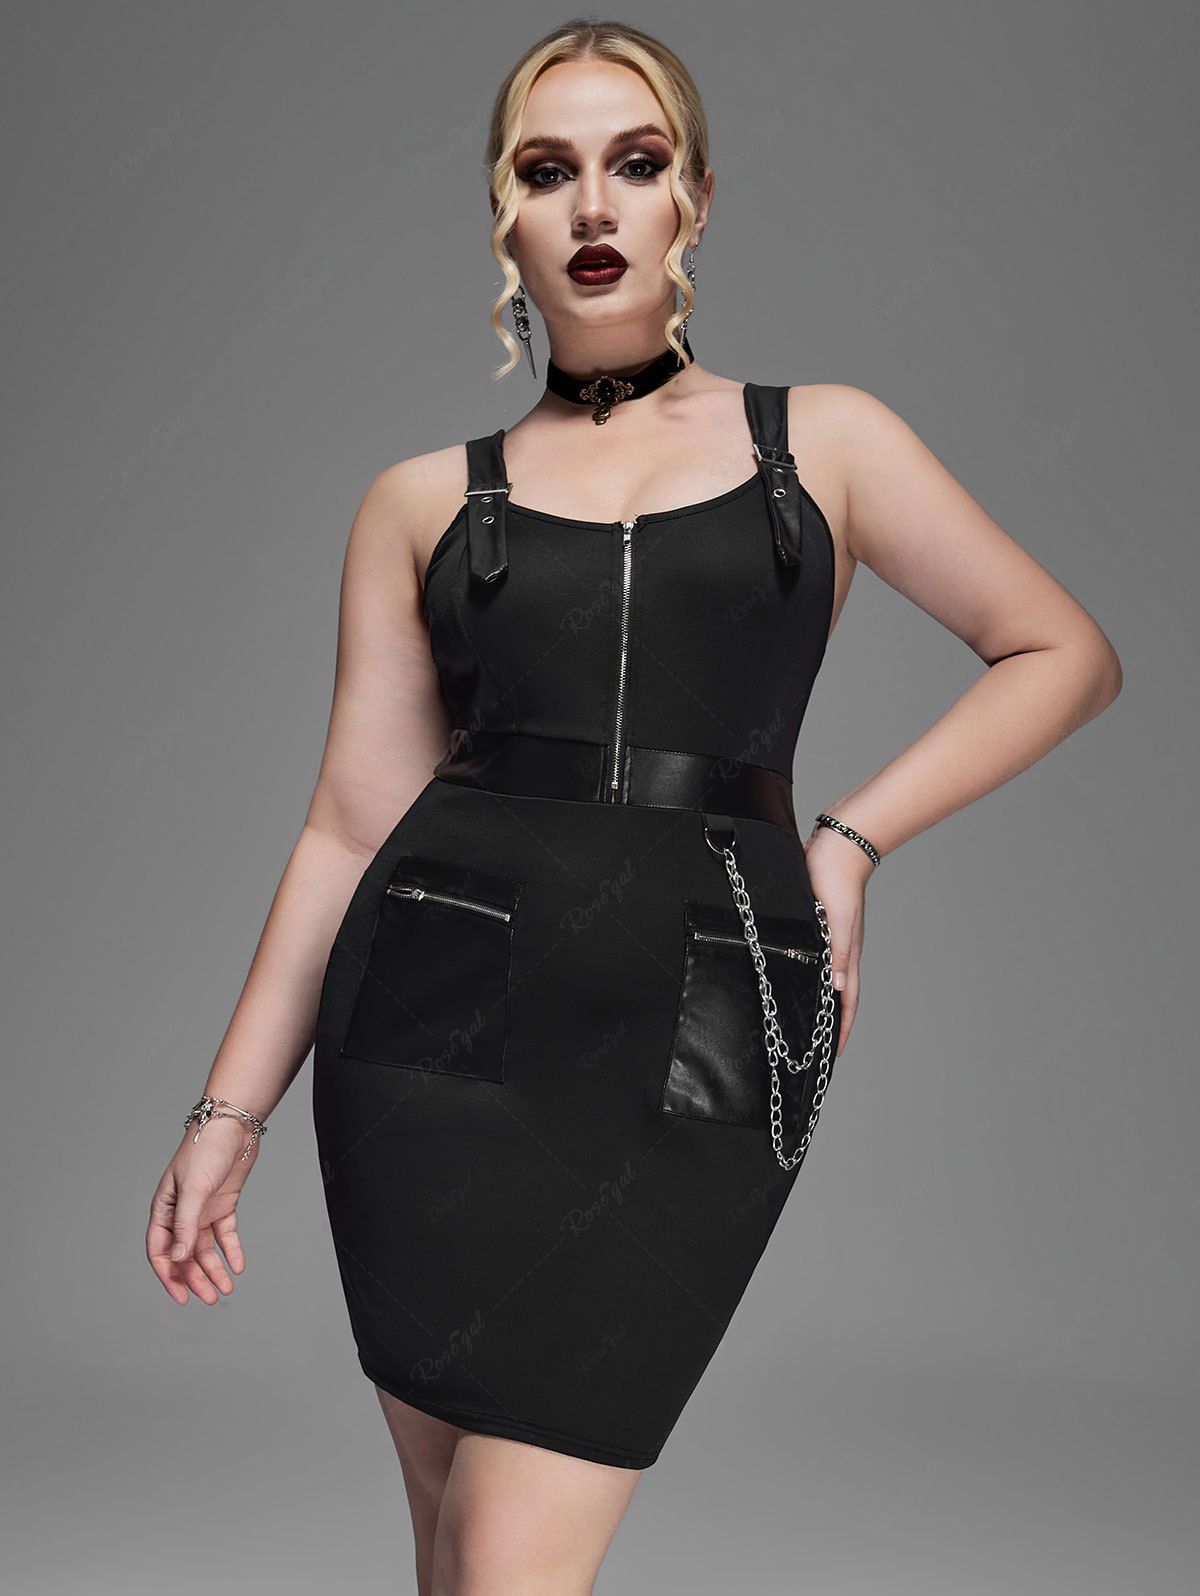 Gothic Punk Chains Buckles PU Panel Bodycon Dress with Pockets